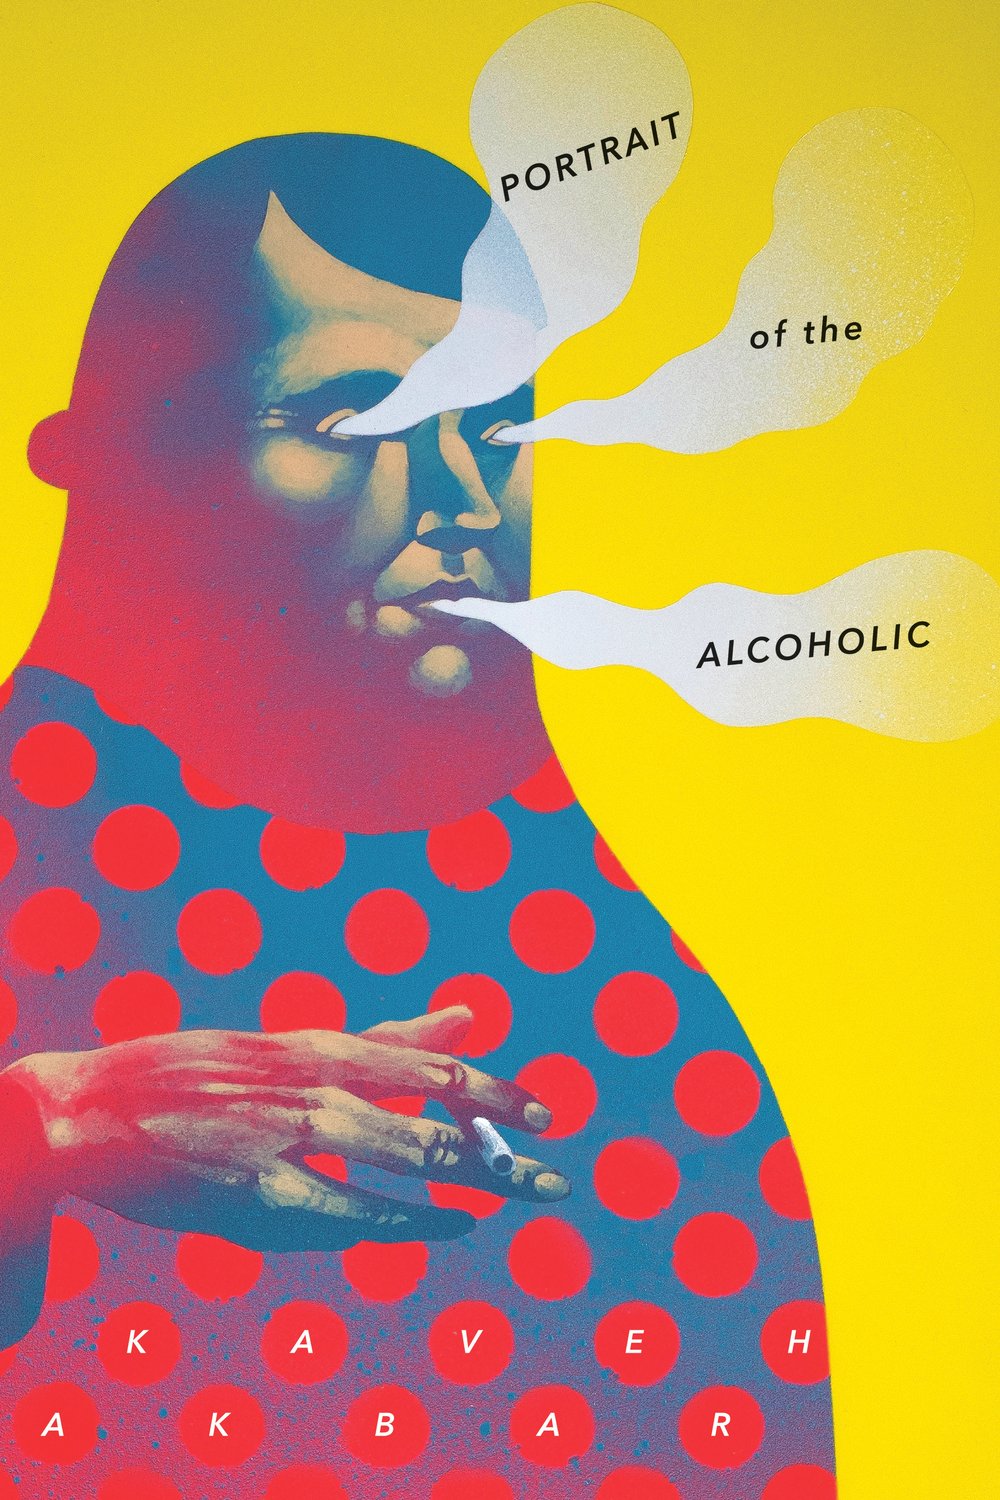 Portrait of the Alcoholic by Kaveh Akbar